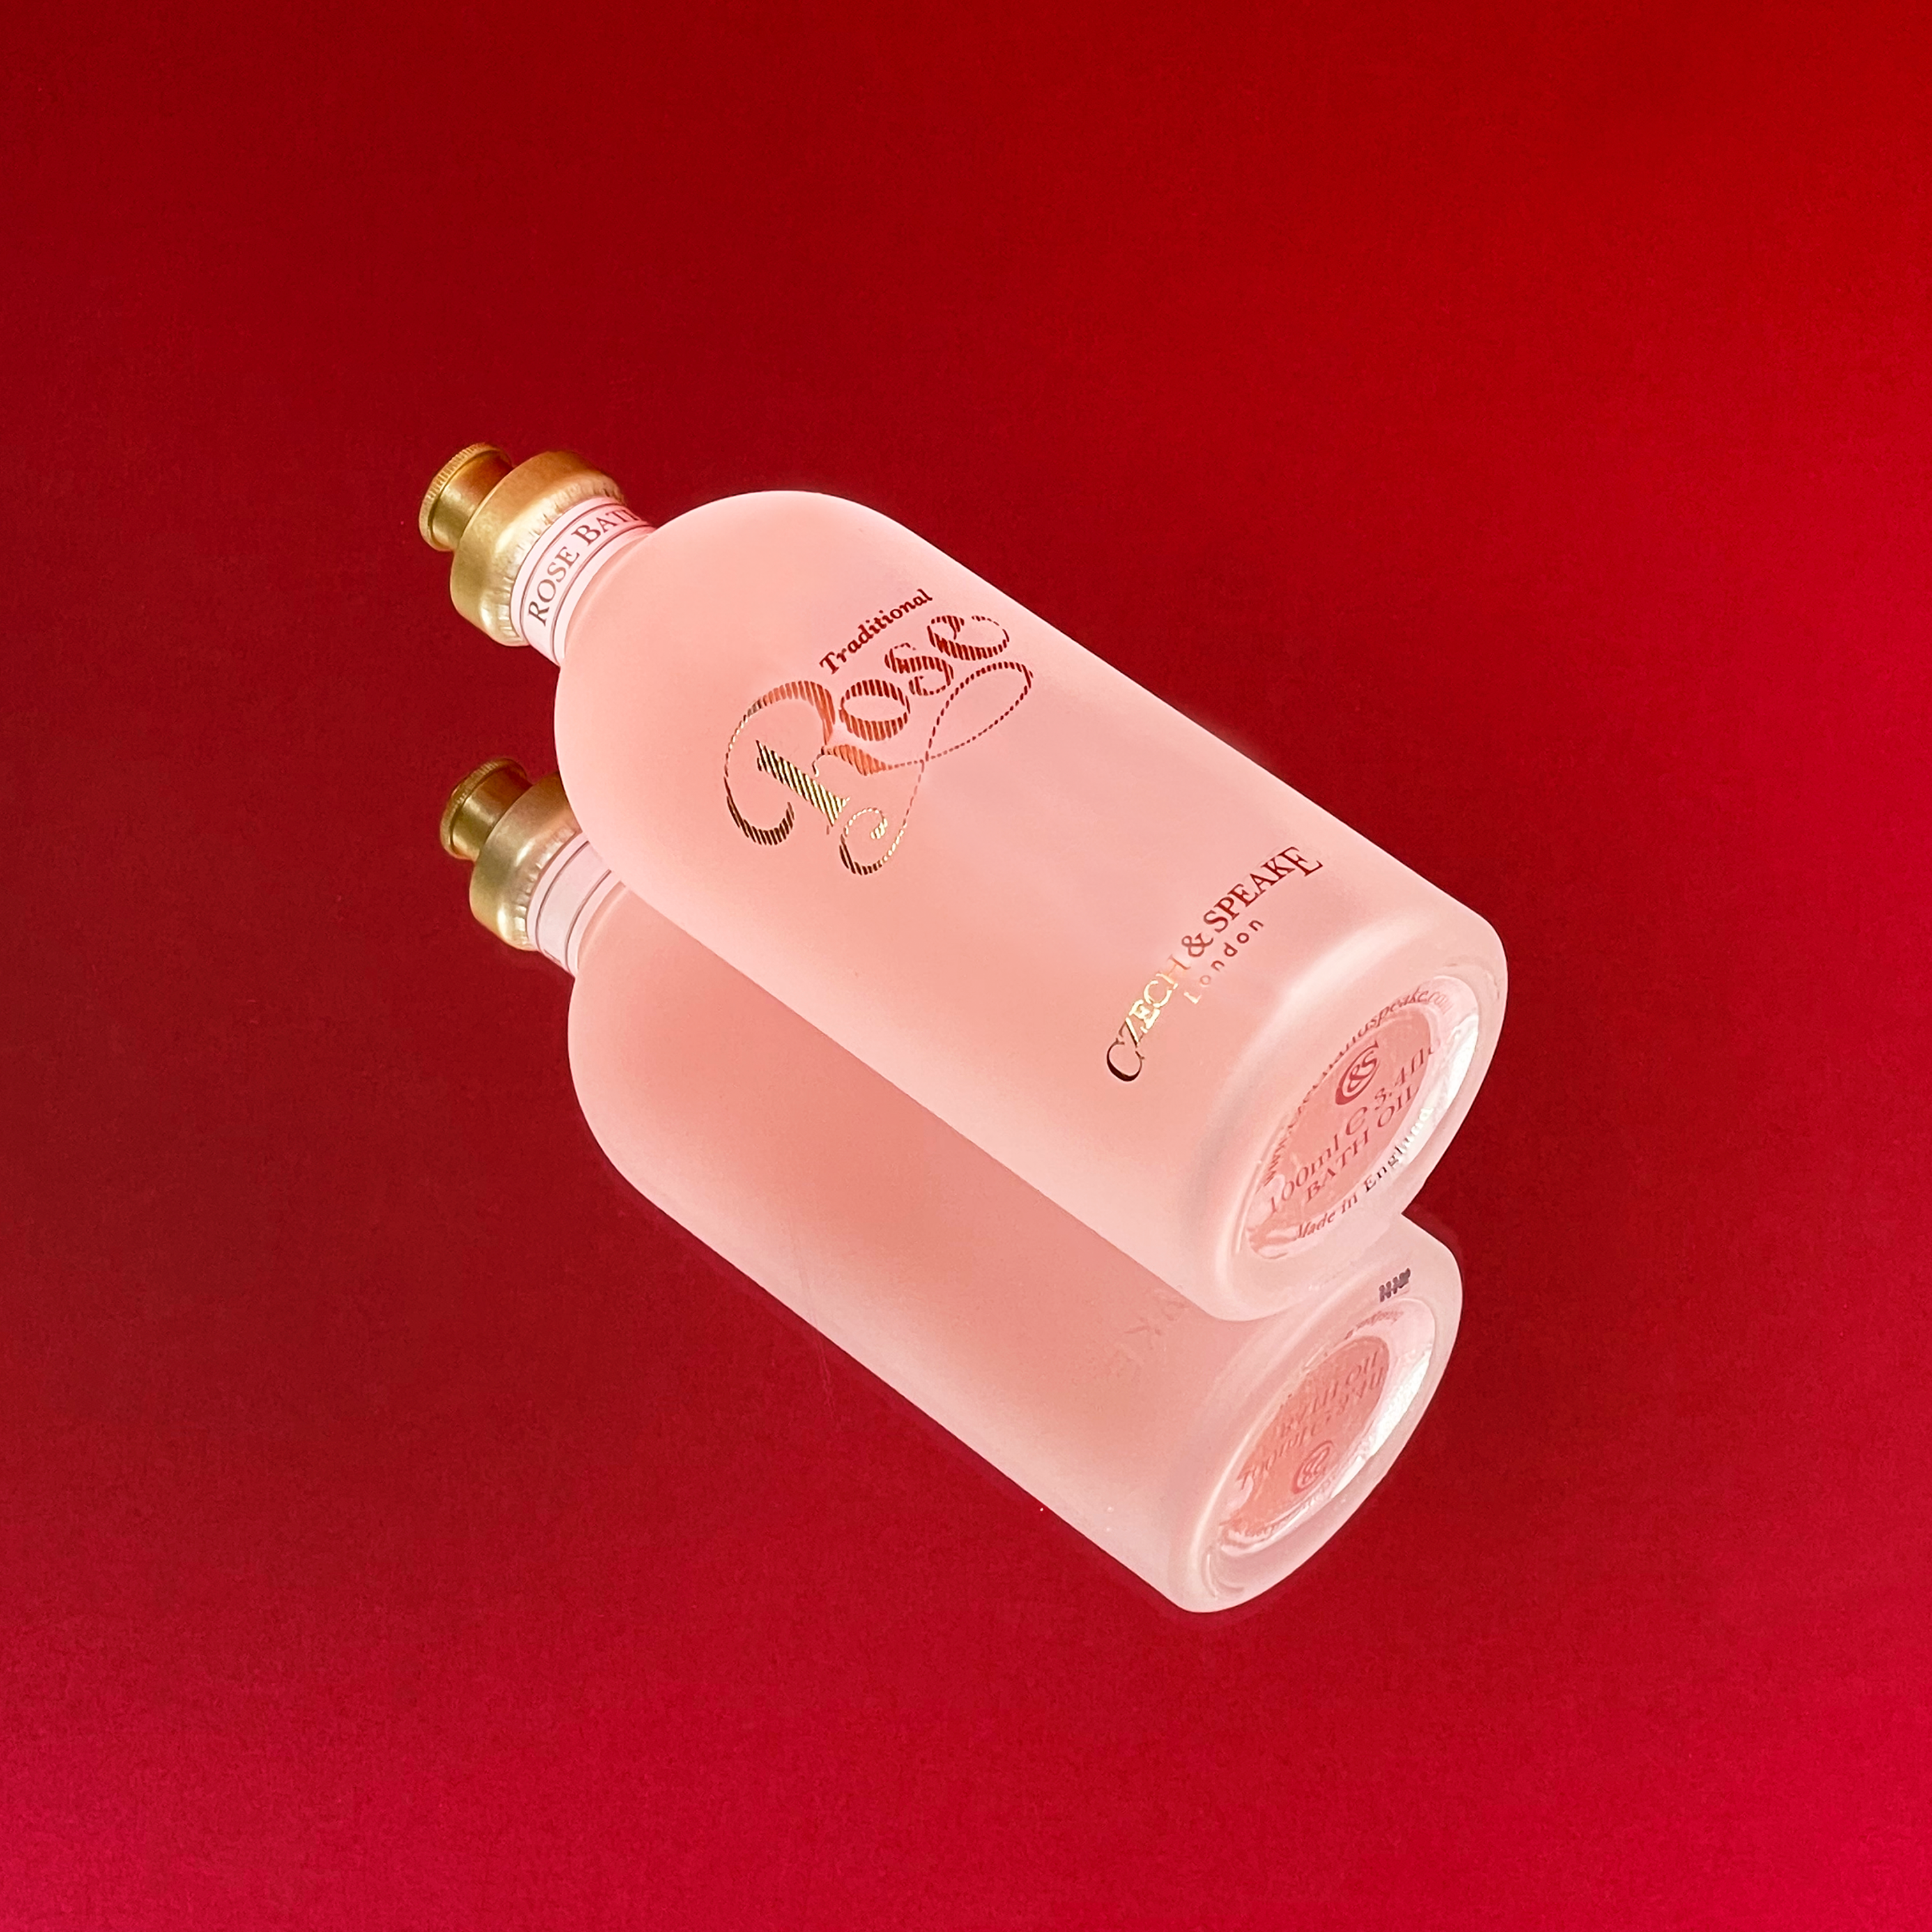 Rose Bath Oil 100ml on red mirrored background